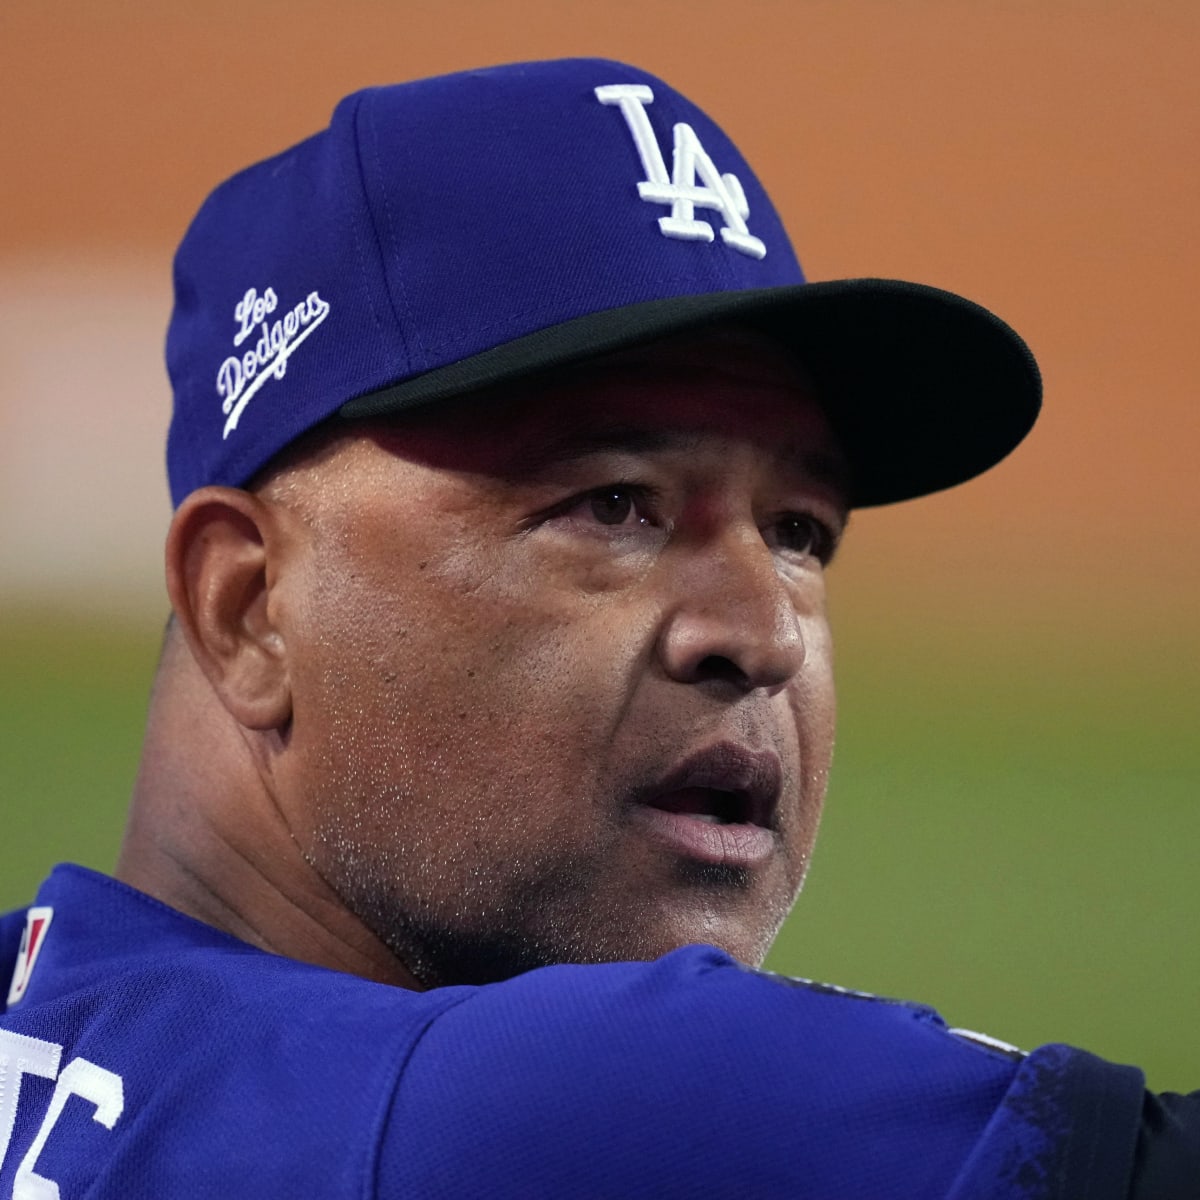 Umpires bar Los Angeles Dodgers skipper Dave Roberts from pitching